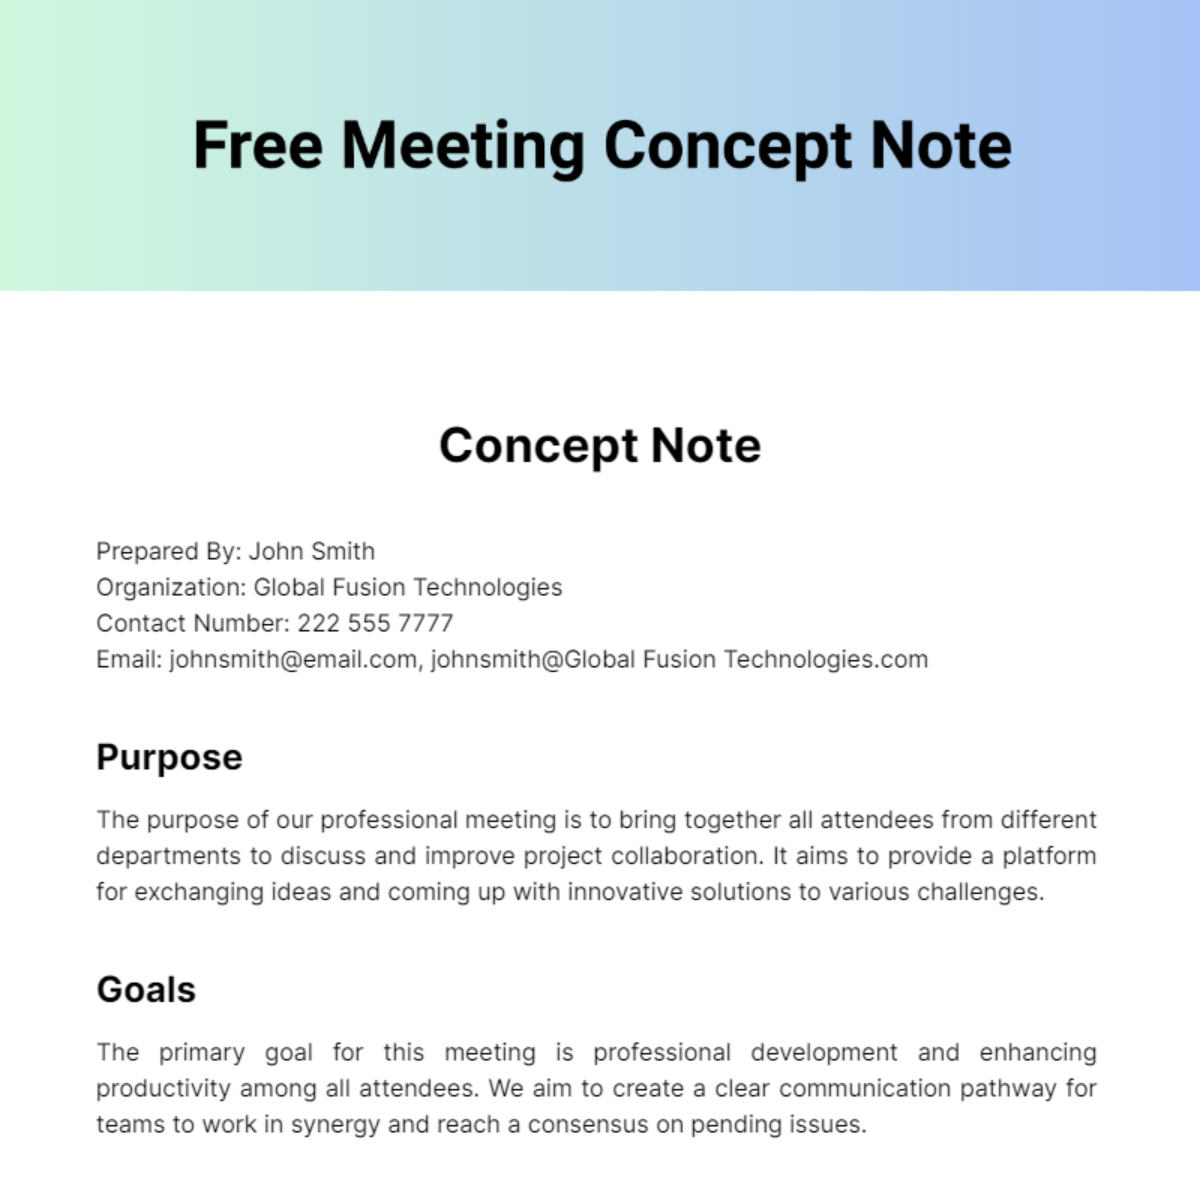 Free Meeting Concept Note Template